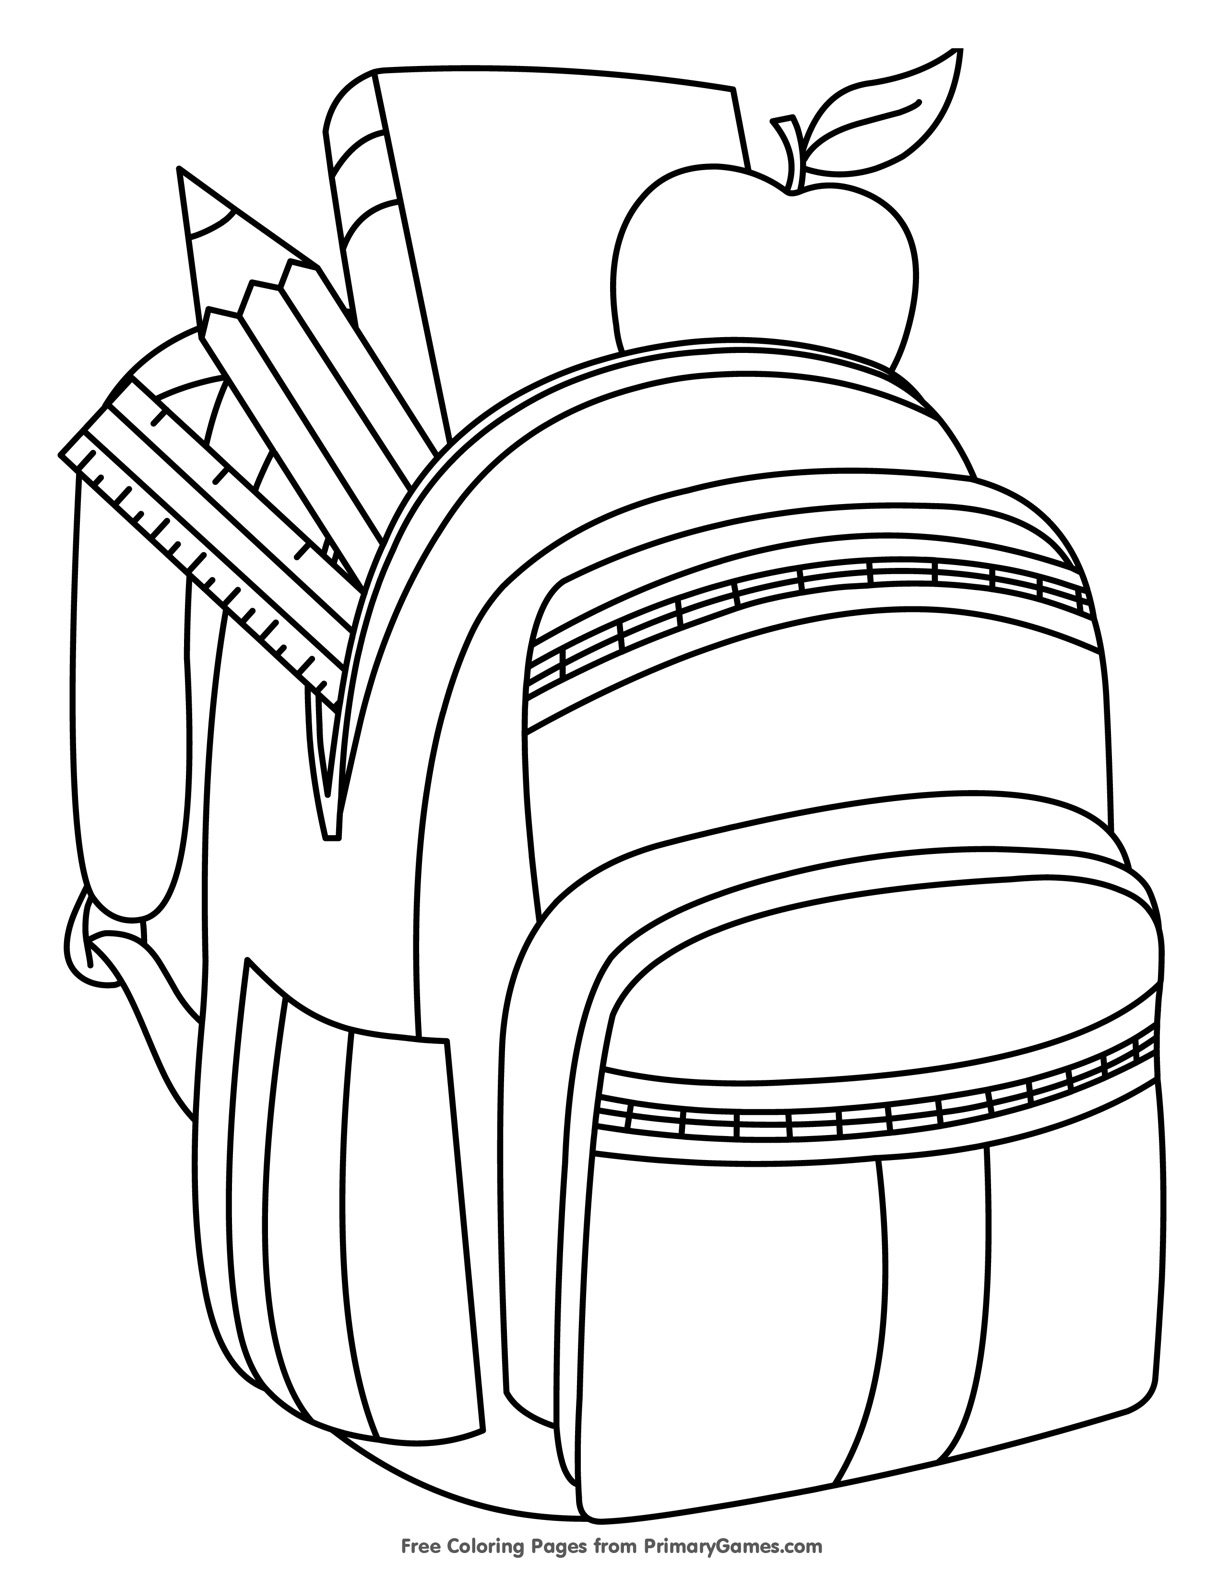 11 Free Back to School Coloring Pages - Motherly